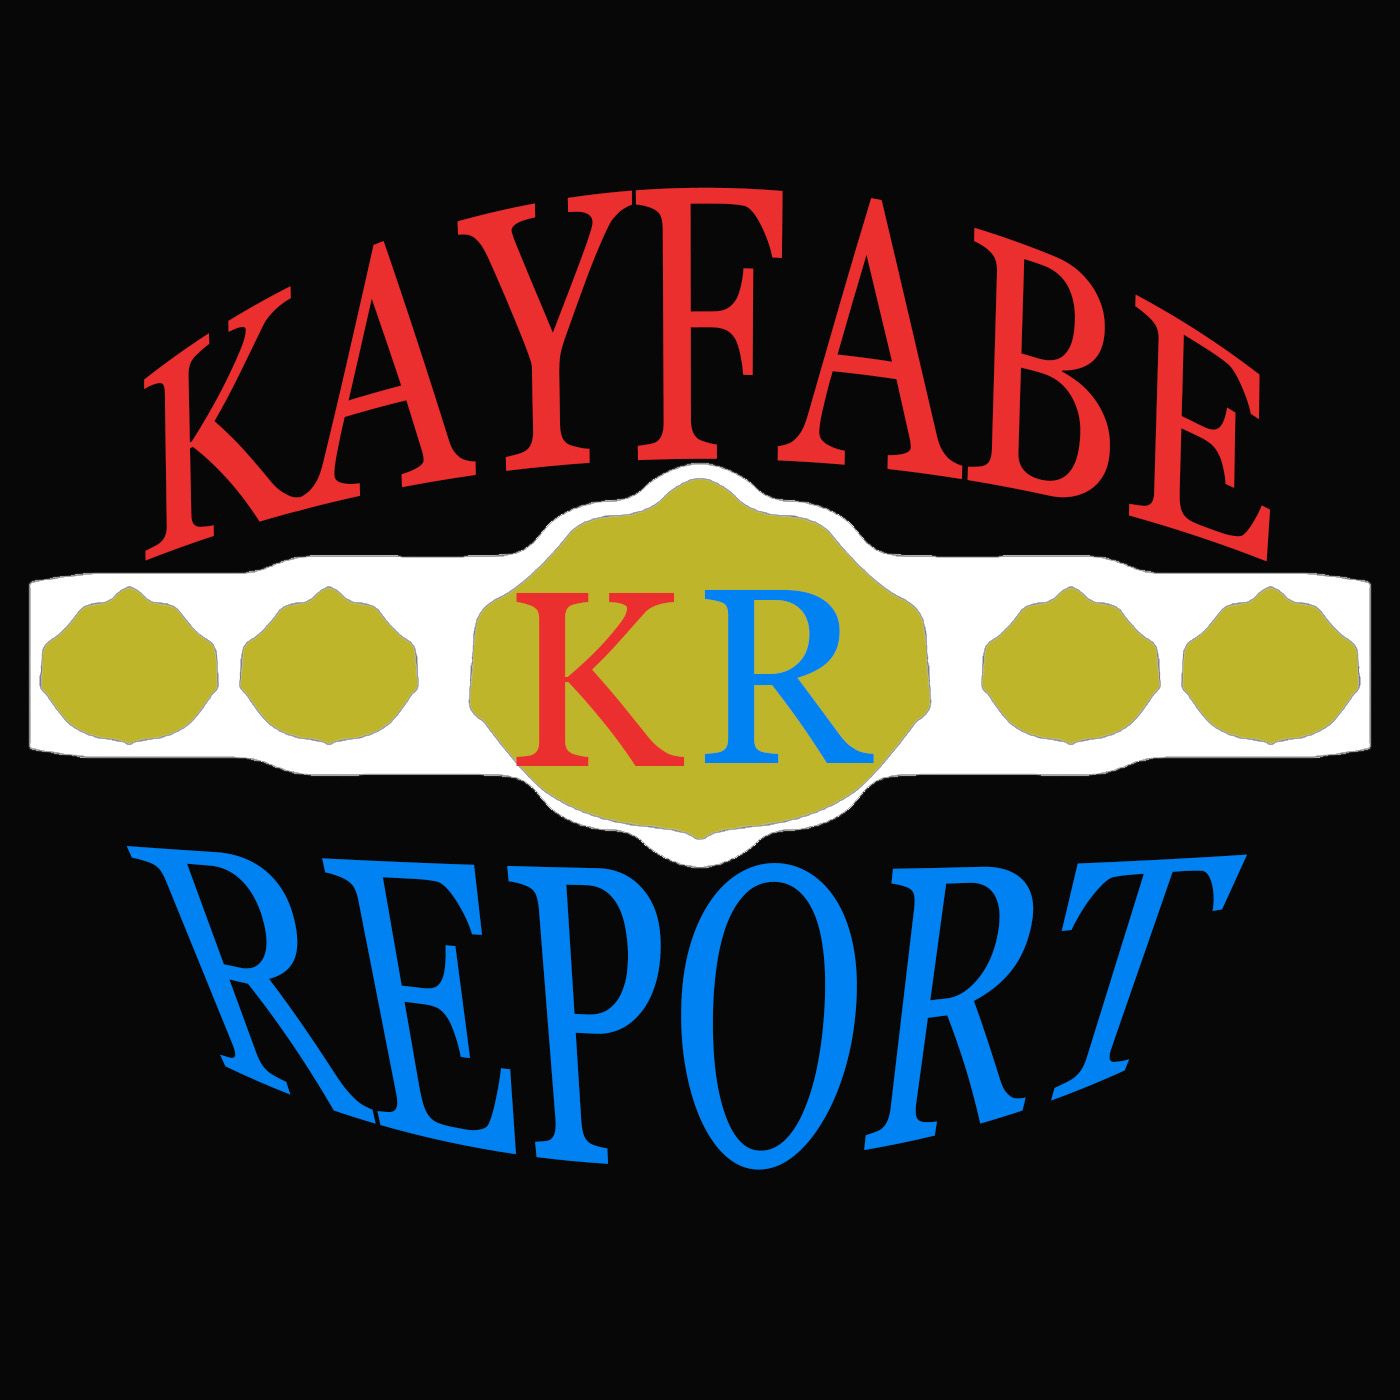 kayfabe report #43 - We are finally together in the same room